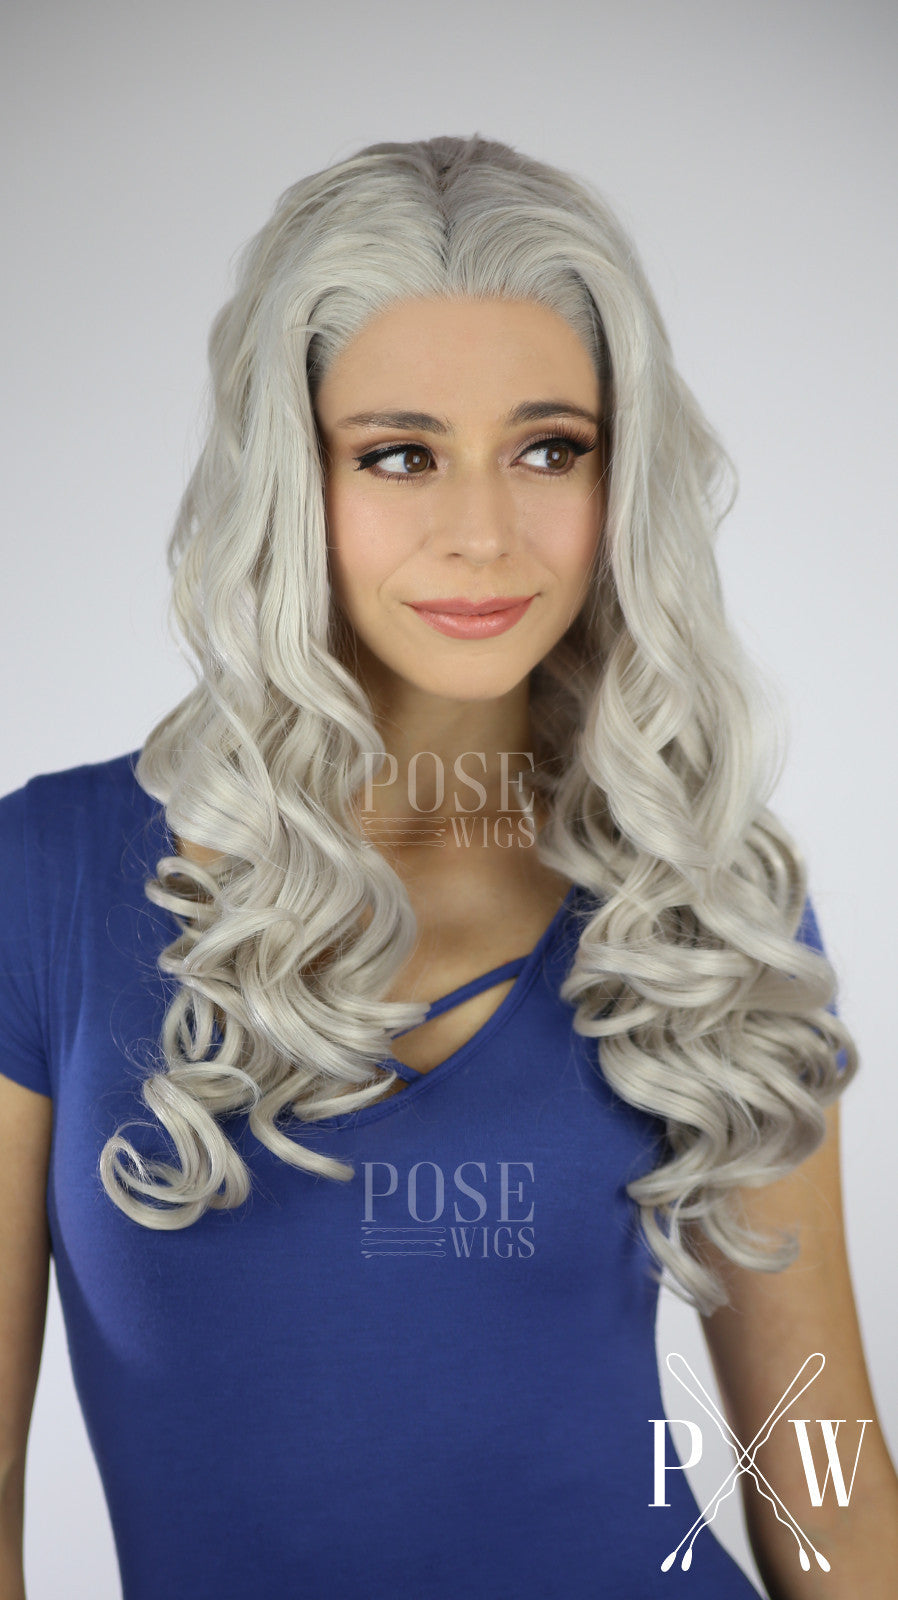 Daenerys Wig Silver Grey Long Curly Lace Front Wig - Princess Series LP011